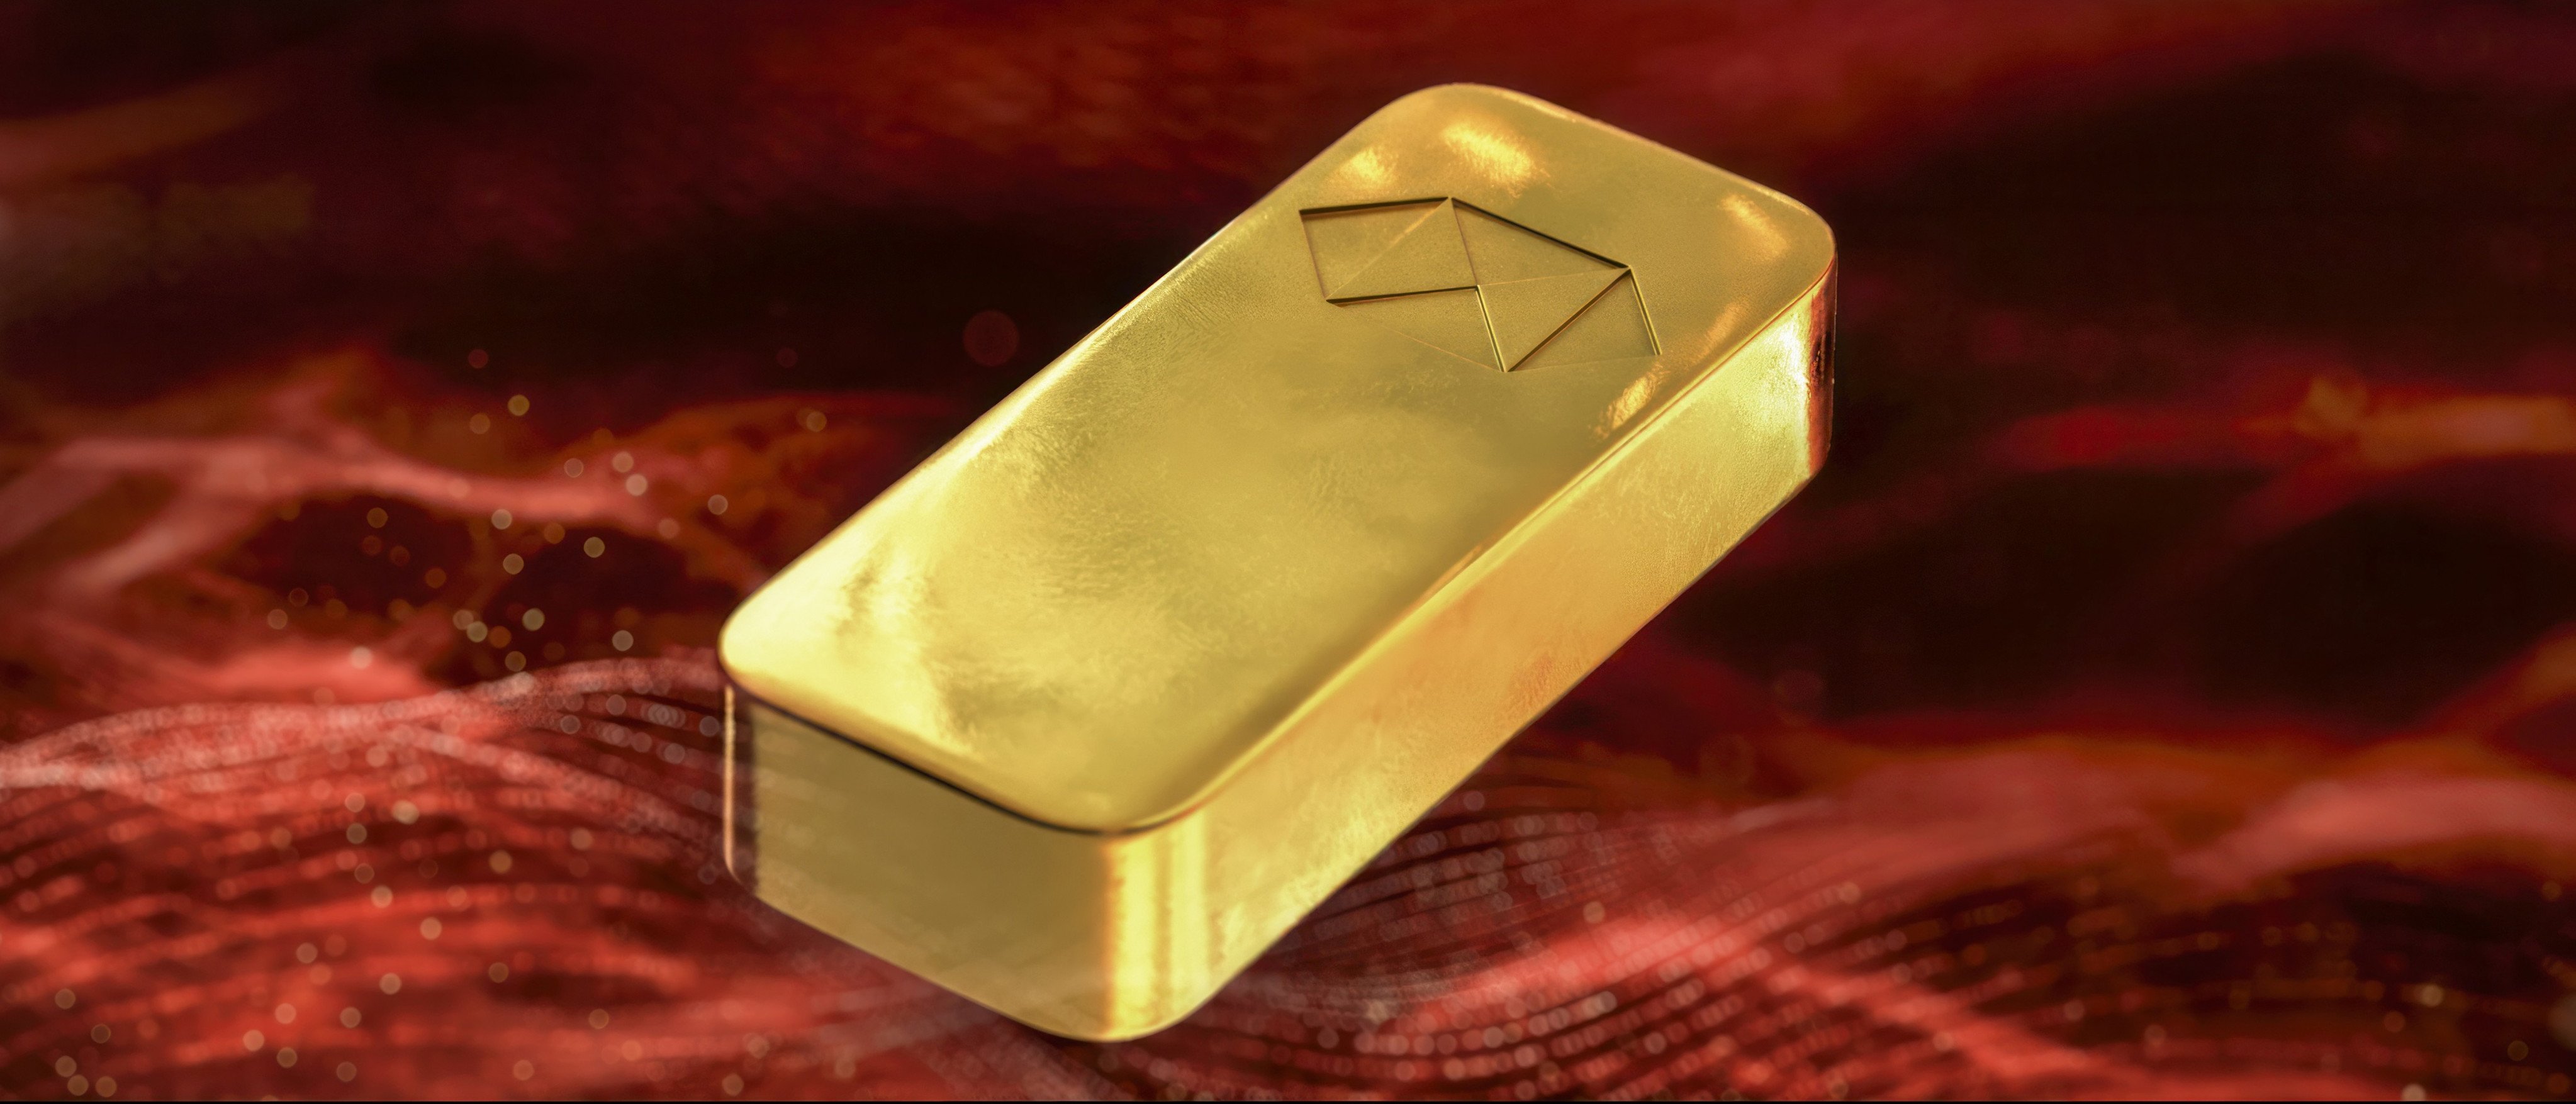 HSBC Gold Token, available on the lender’s online banking and mobile app, is the first such retail product to be issued by a bank, according to HSBC. Photo: SCMP Handout